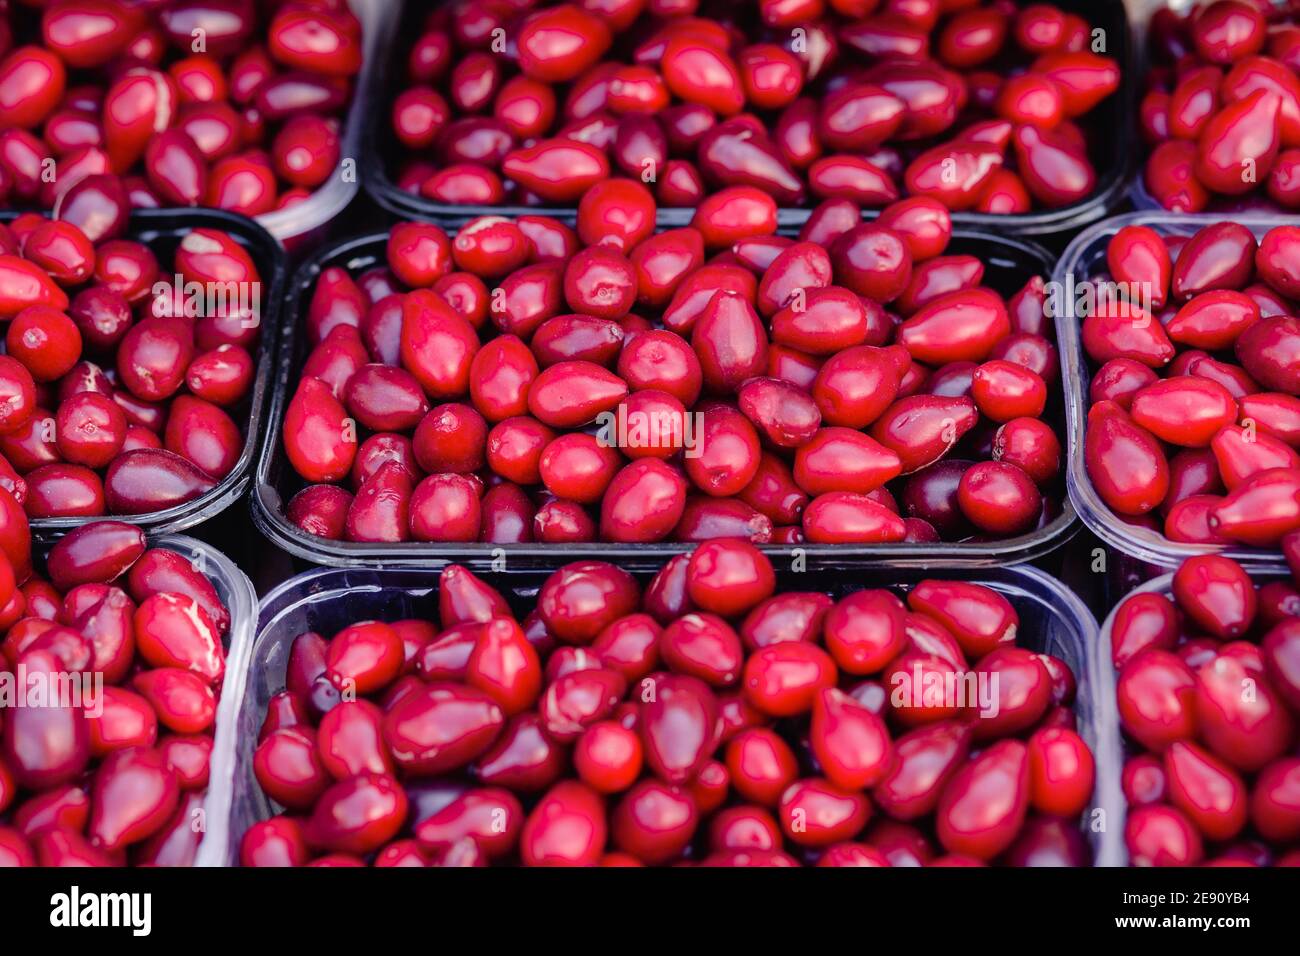 Red dogwood berries in plastic transparent container box on a street grocery shelves. Dogwood crop on sale. Fresh berries. Stock Photo